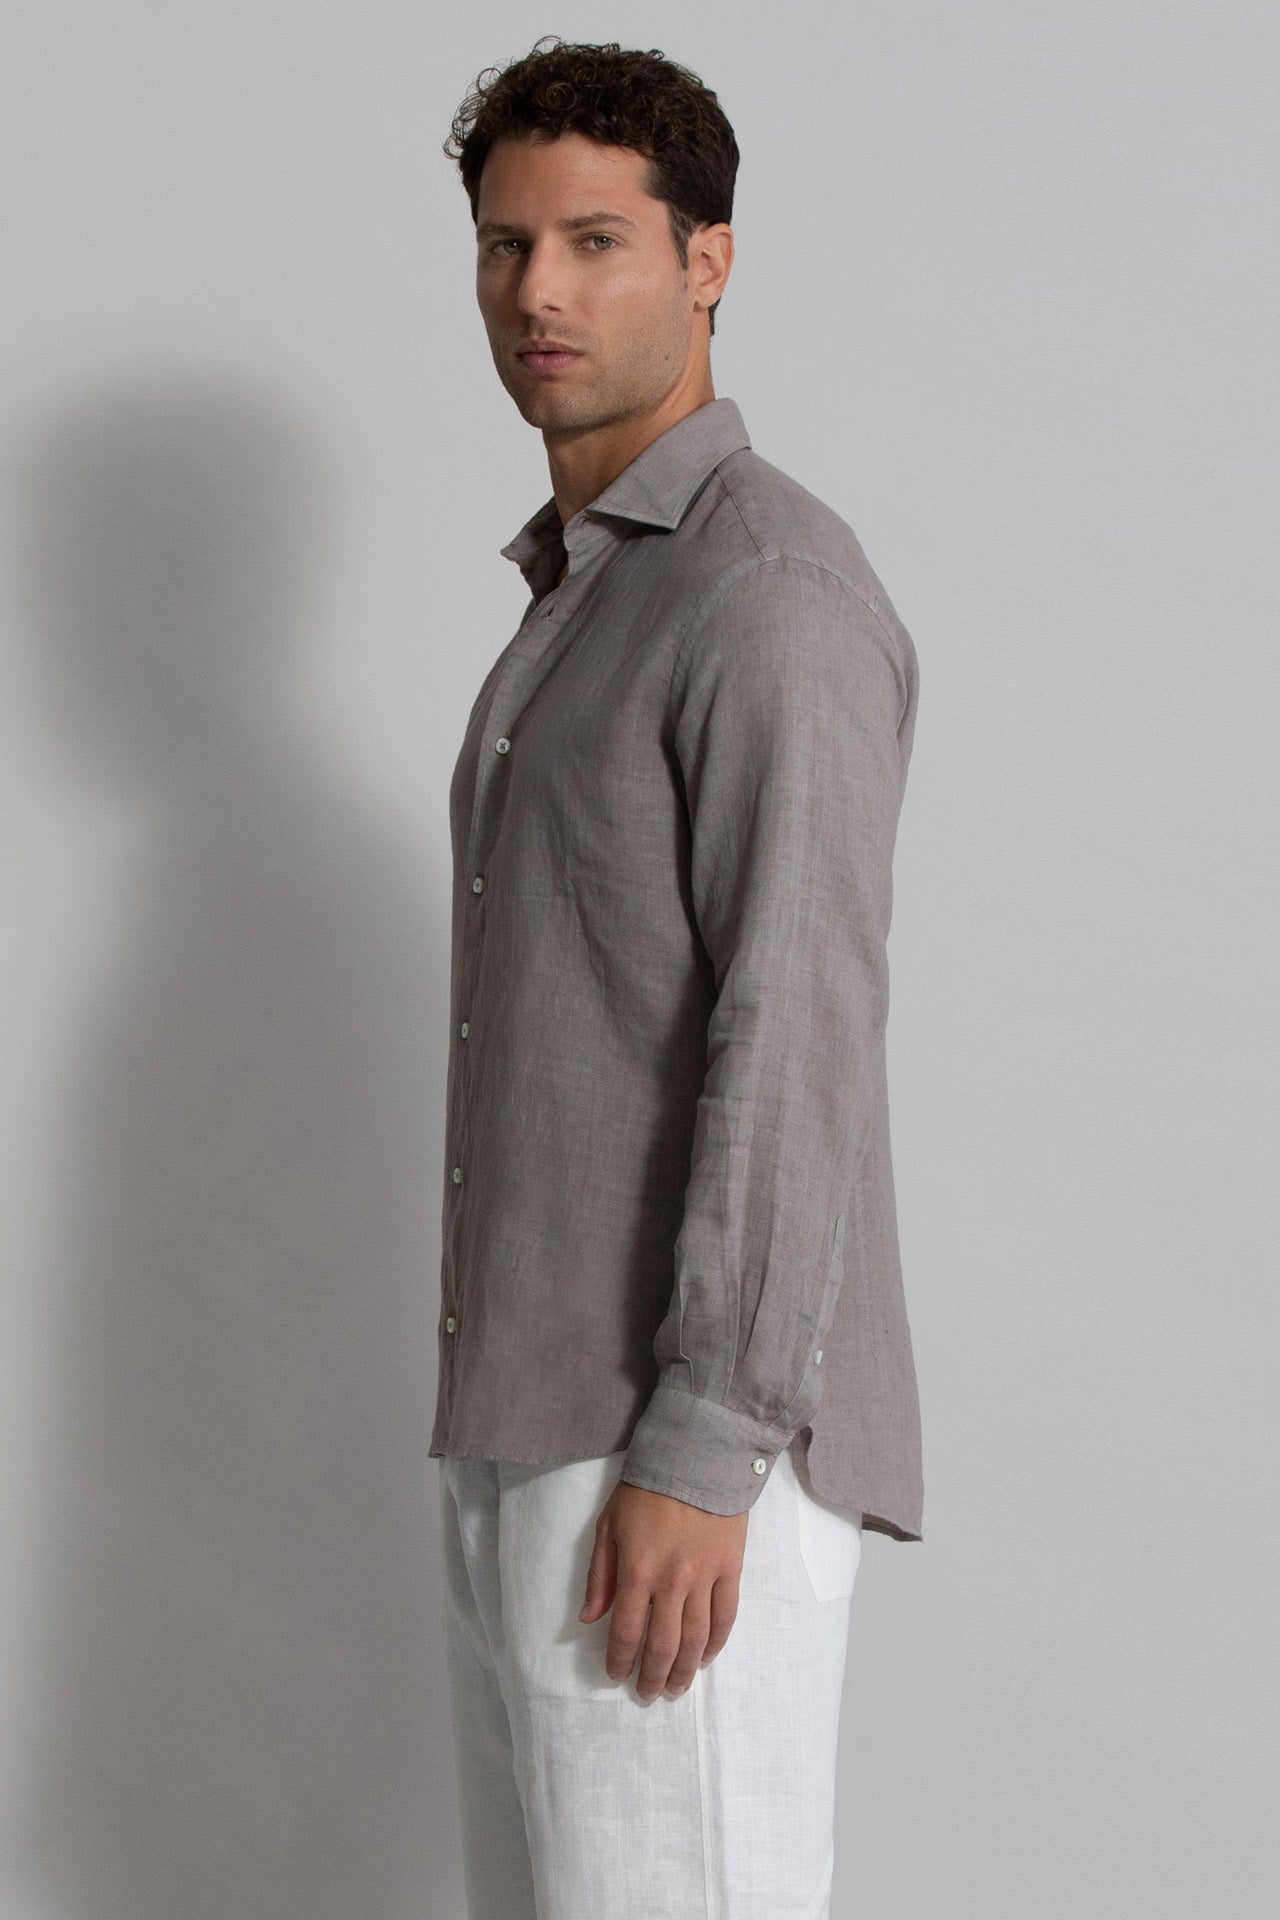 Men's Linen Shirts with Long Sleeve - Grey - Side view